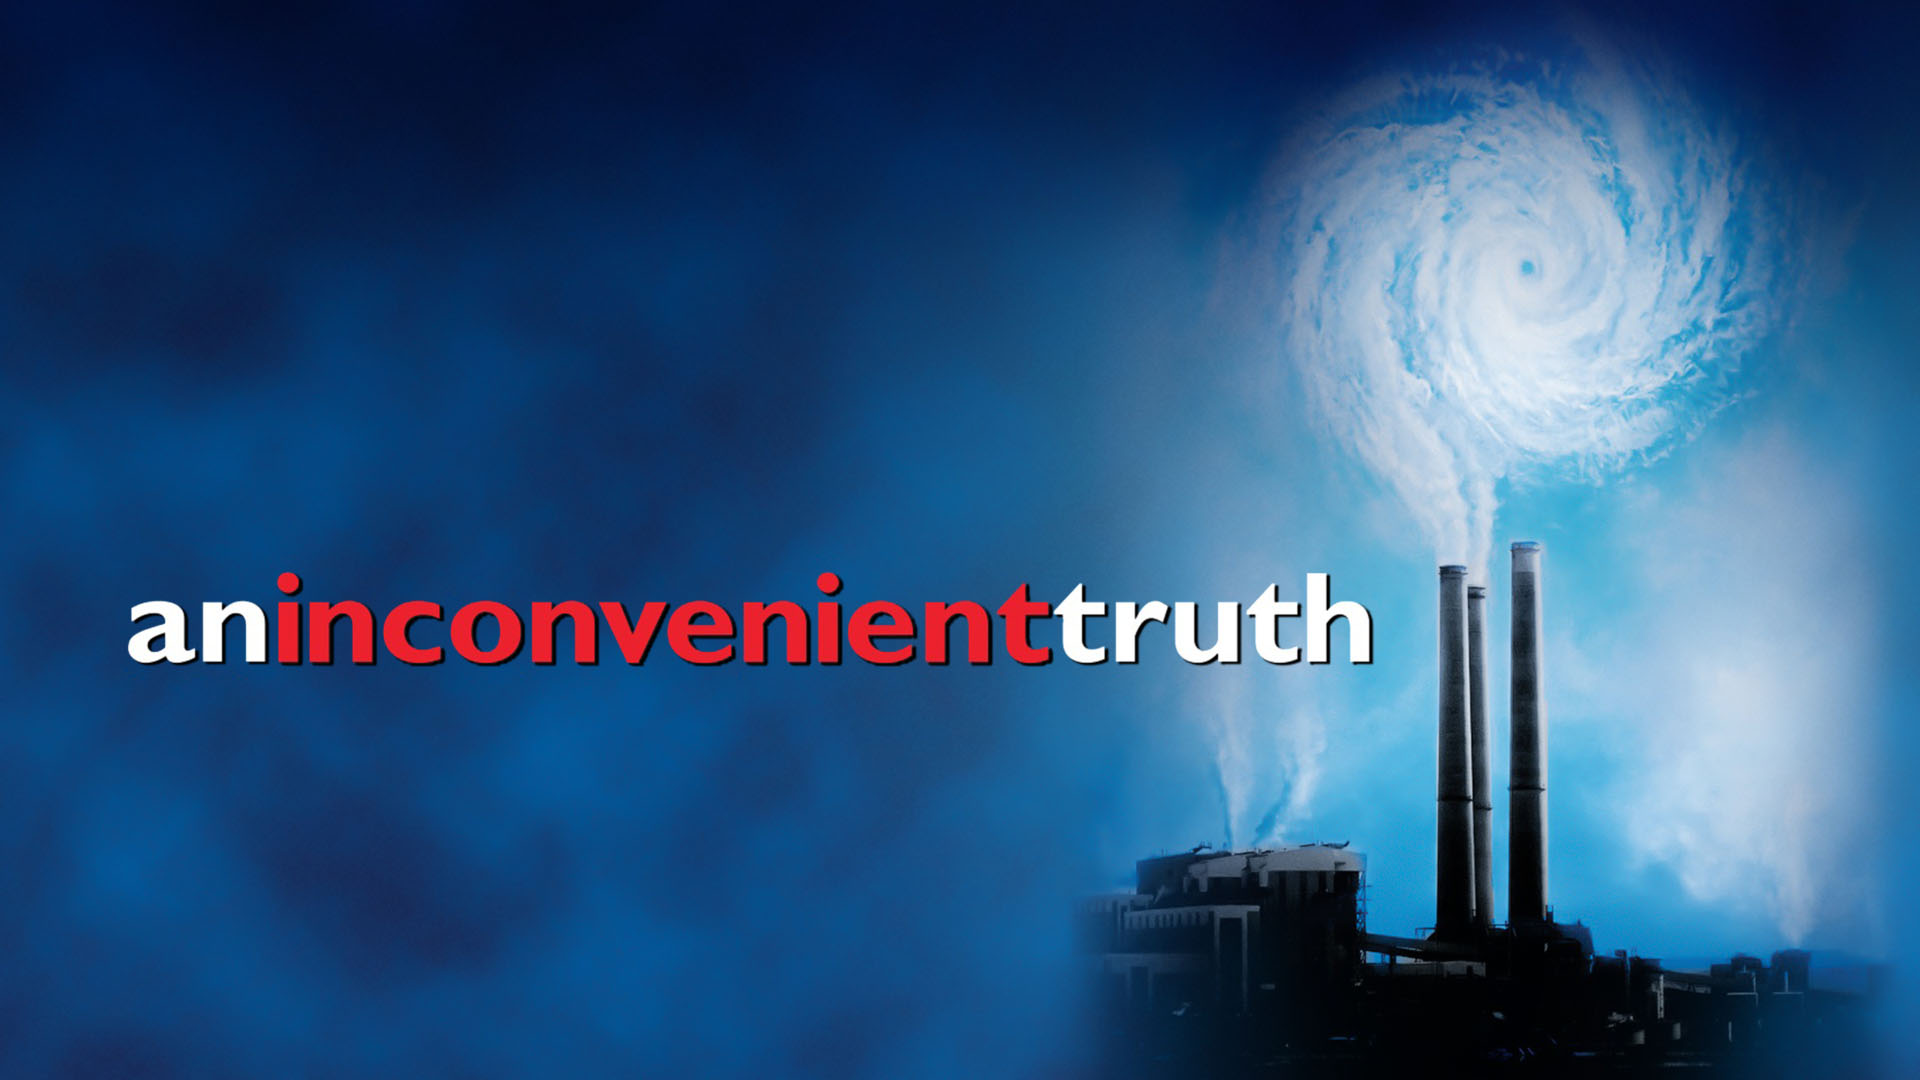 36-facts-about-the-movie-an-inconvenient-truth